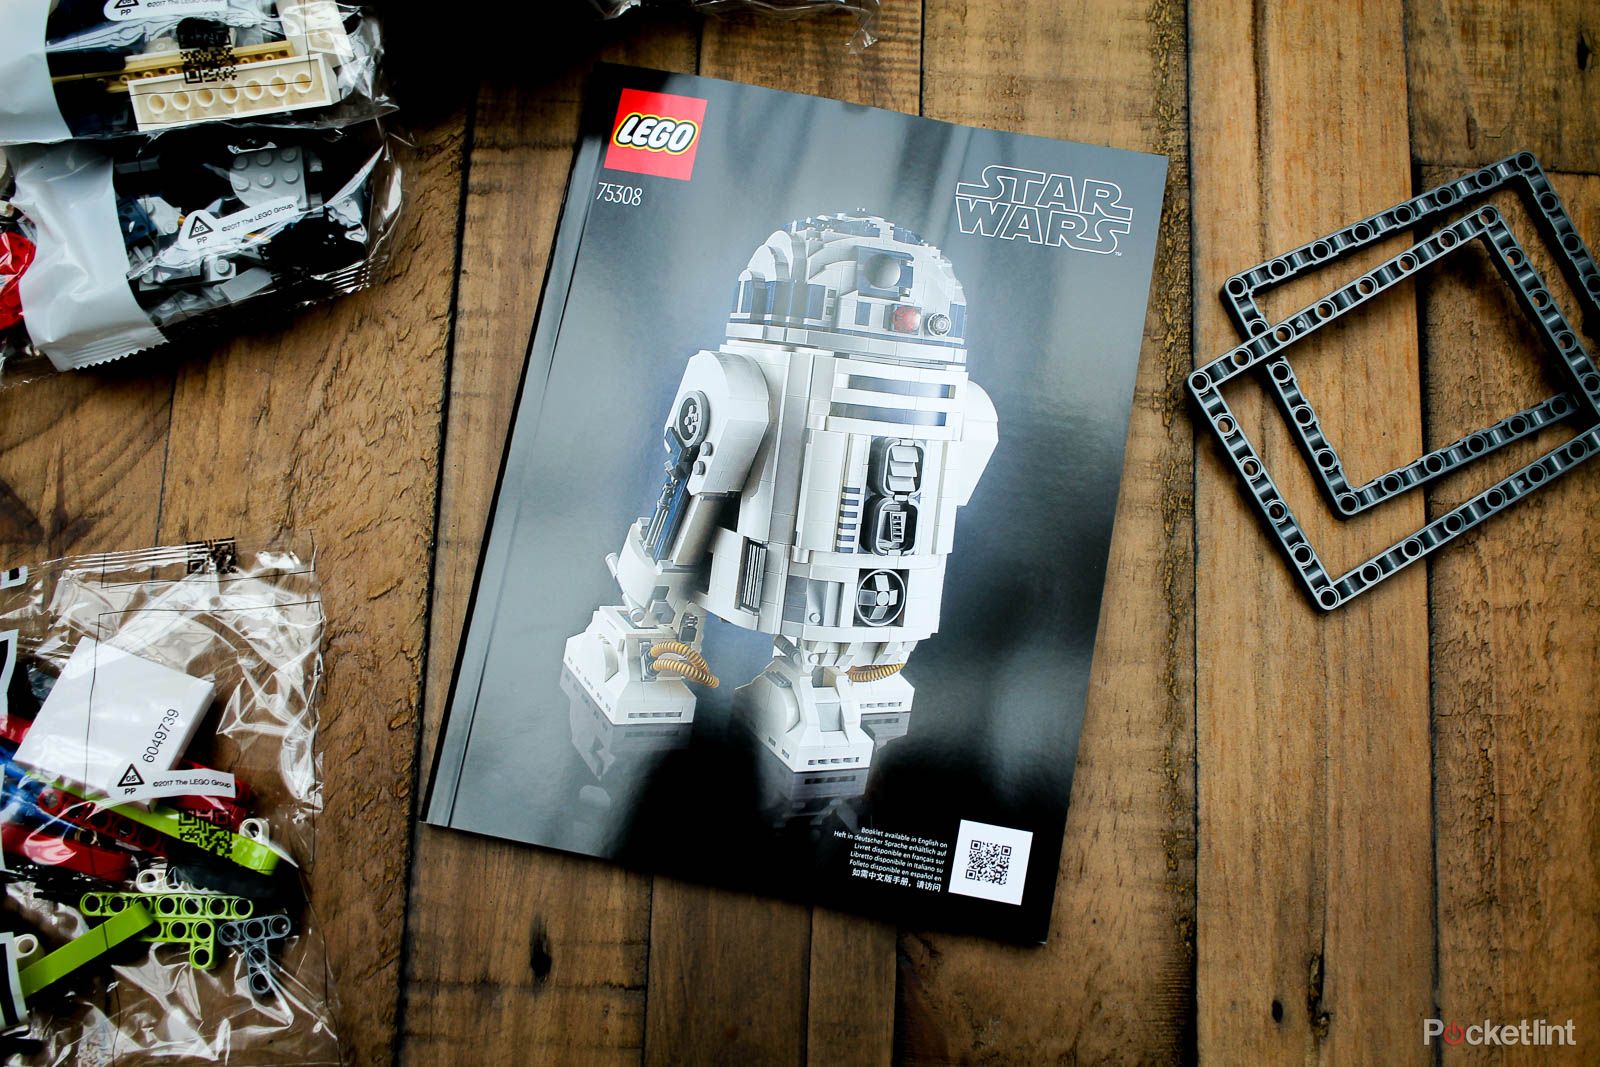 Lego R2-D2 hands on build pictures photo 2